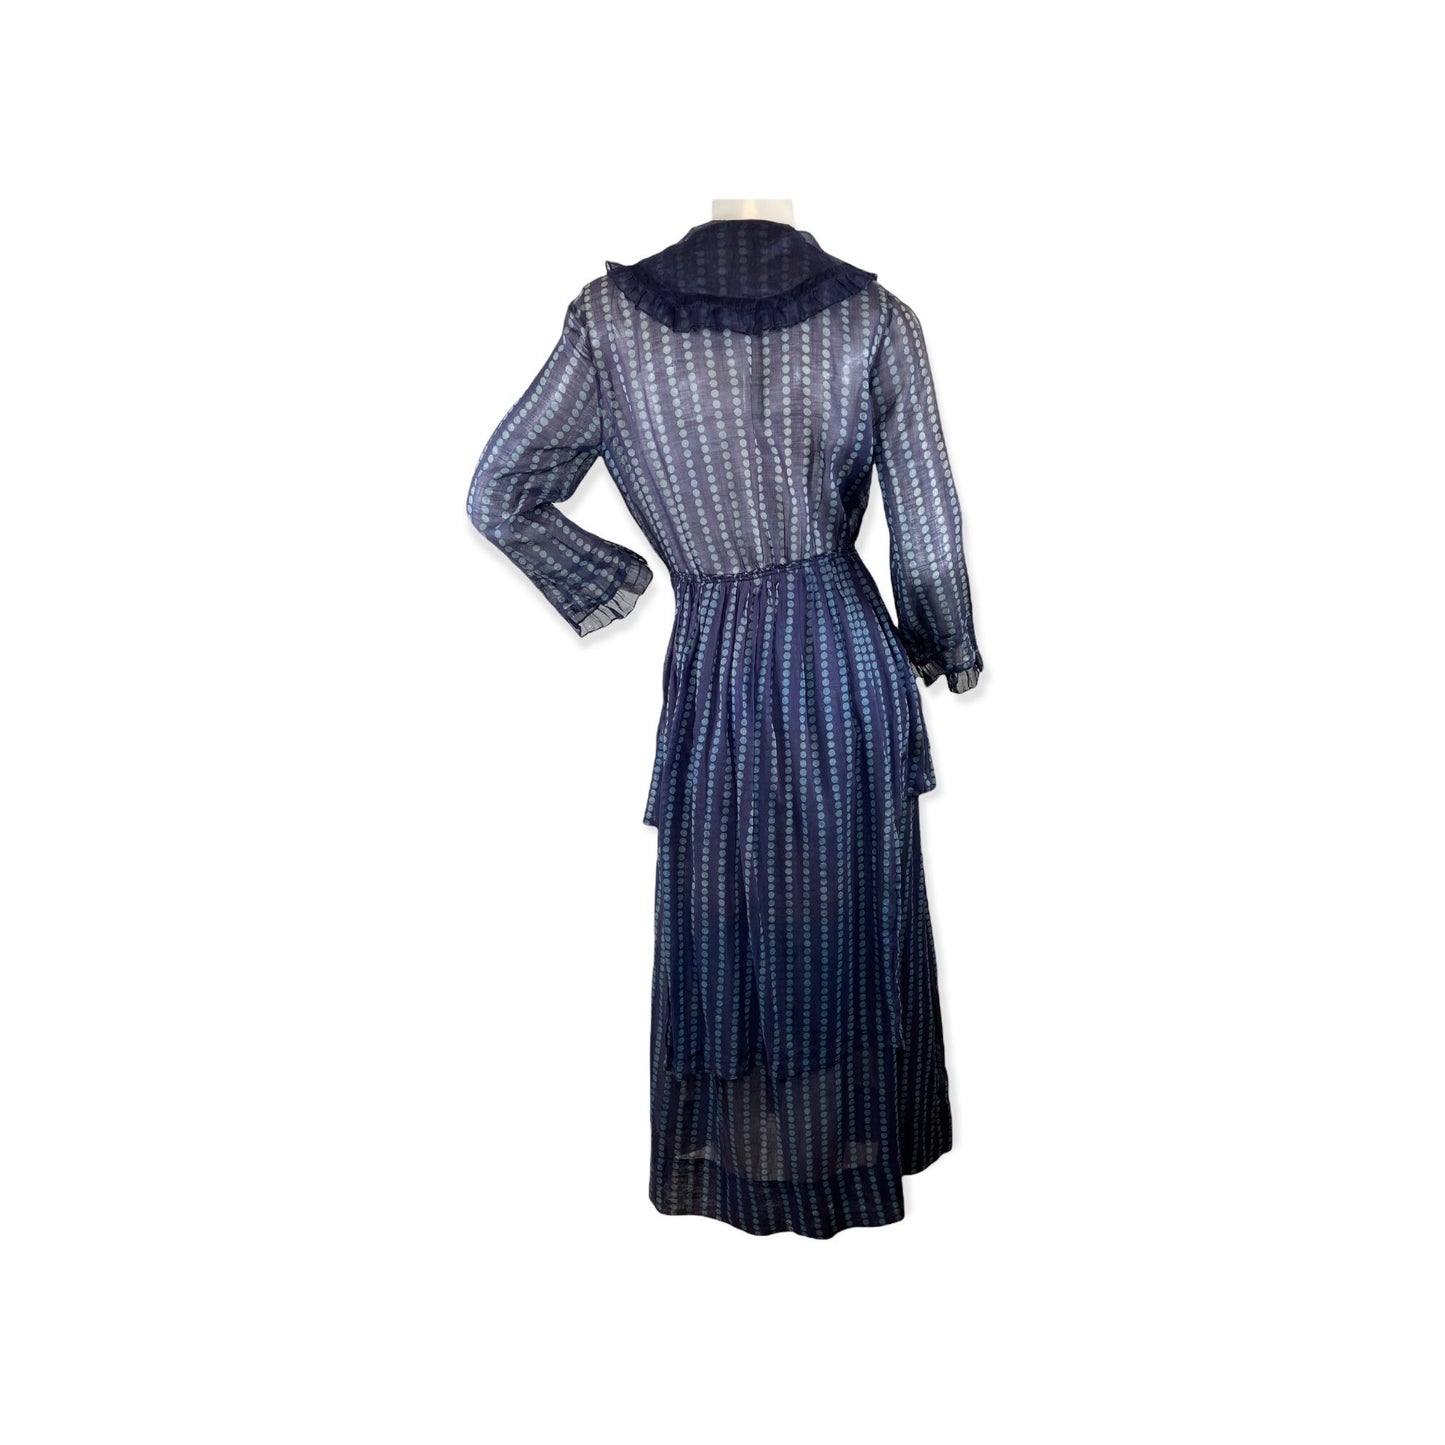 1910s polka dot dress with floating panels and hidden pocket Size S